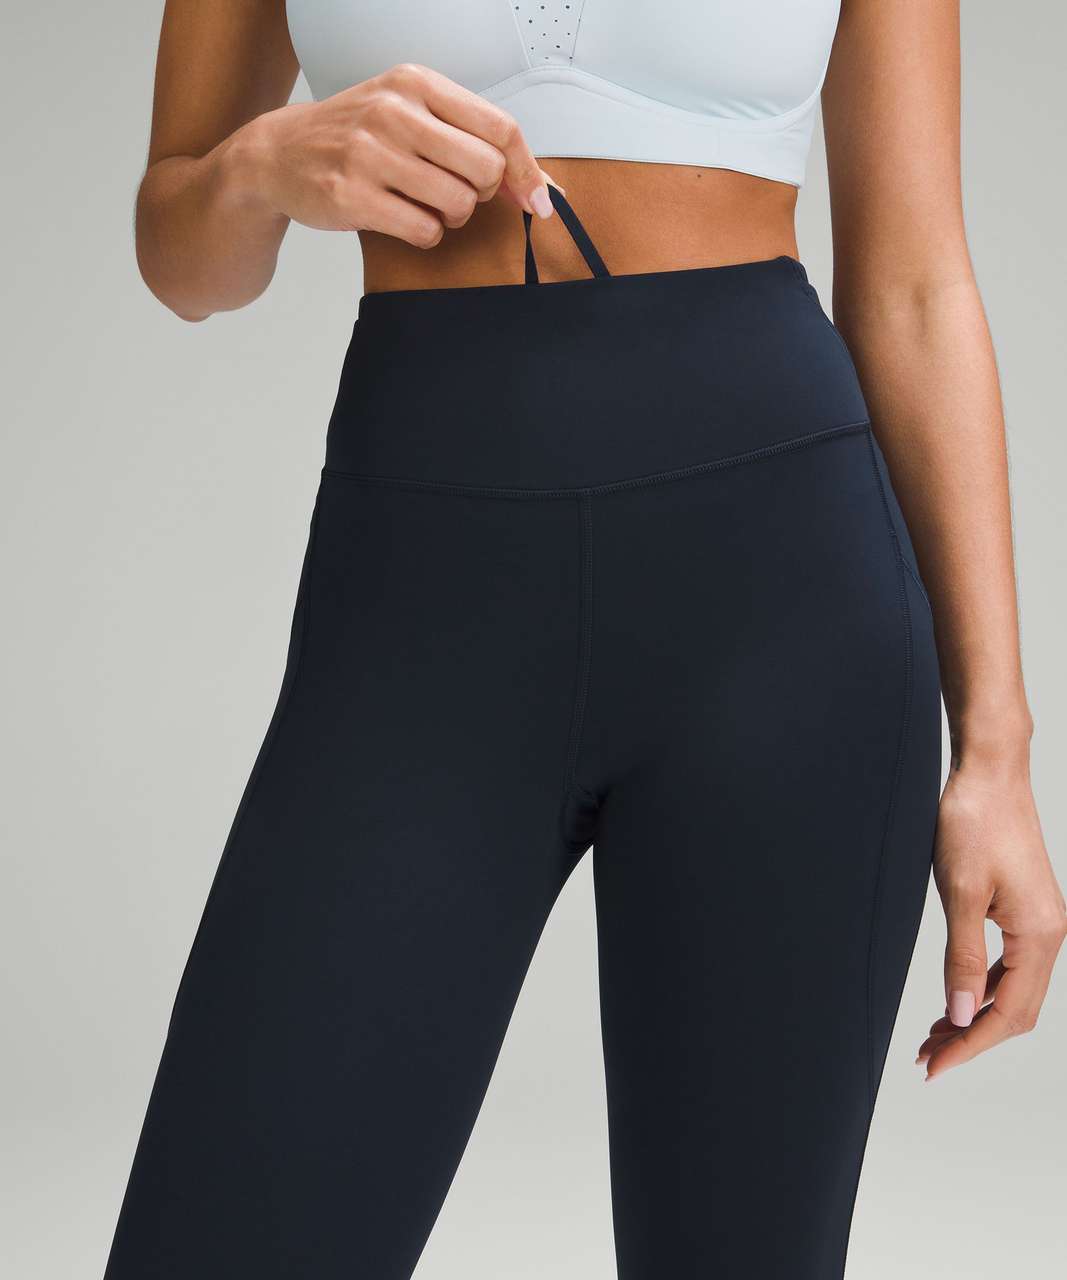 Lululemon Fast and Free High-Rise Crop 23" *Pockets - True Navy